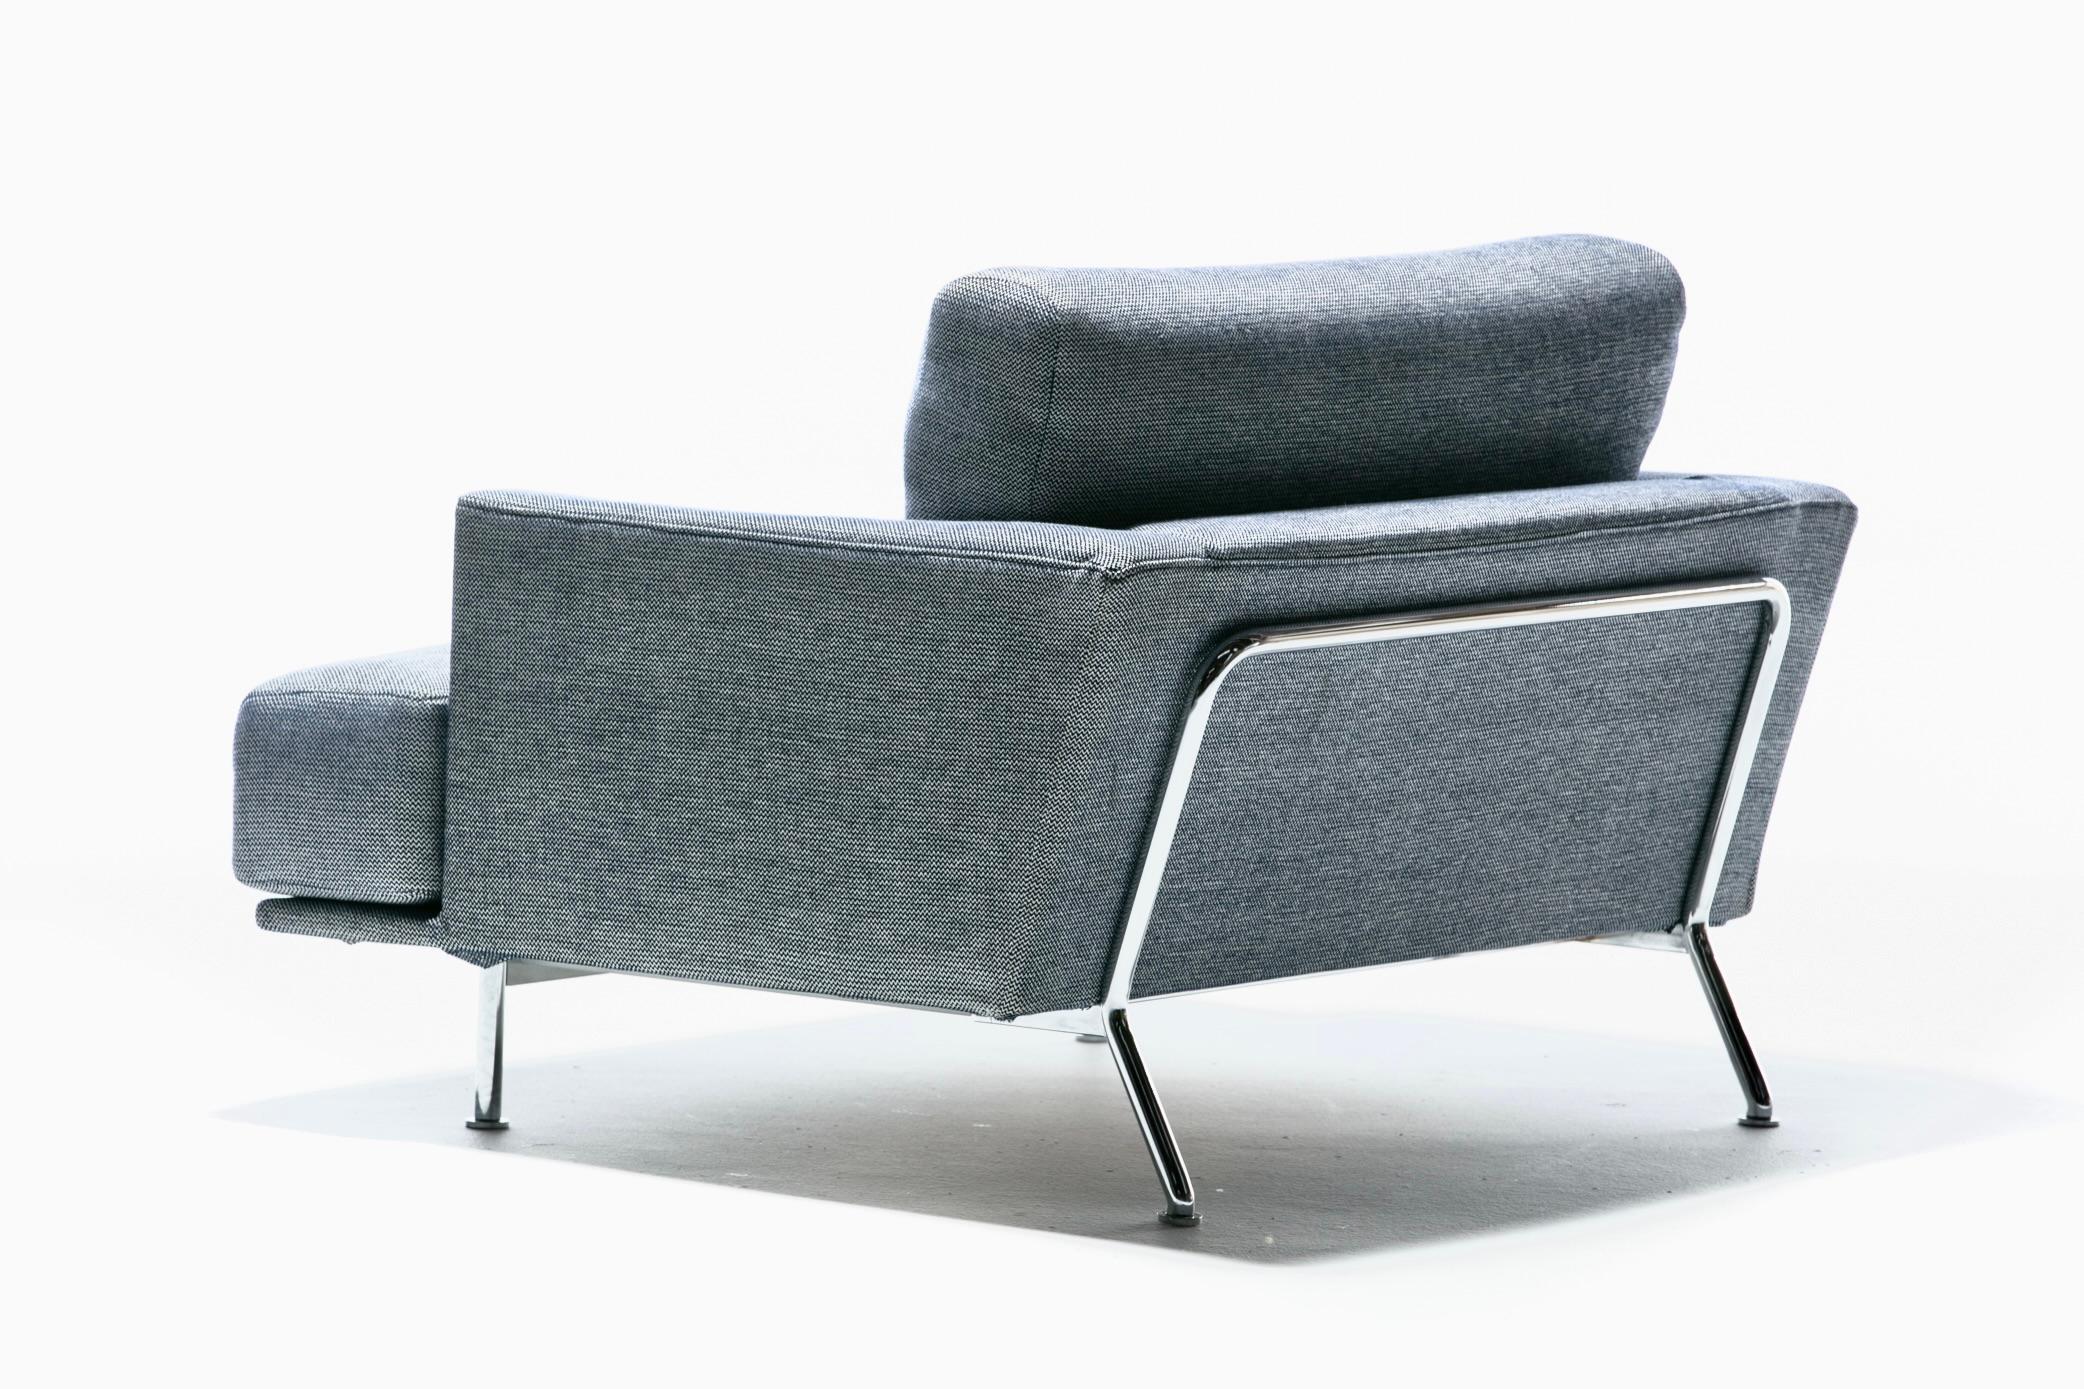 Upholstery Pair of Imported Italian Modern Cassina 253 Nest Lounge Chairs by Piero Lissoni  For Sale